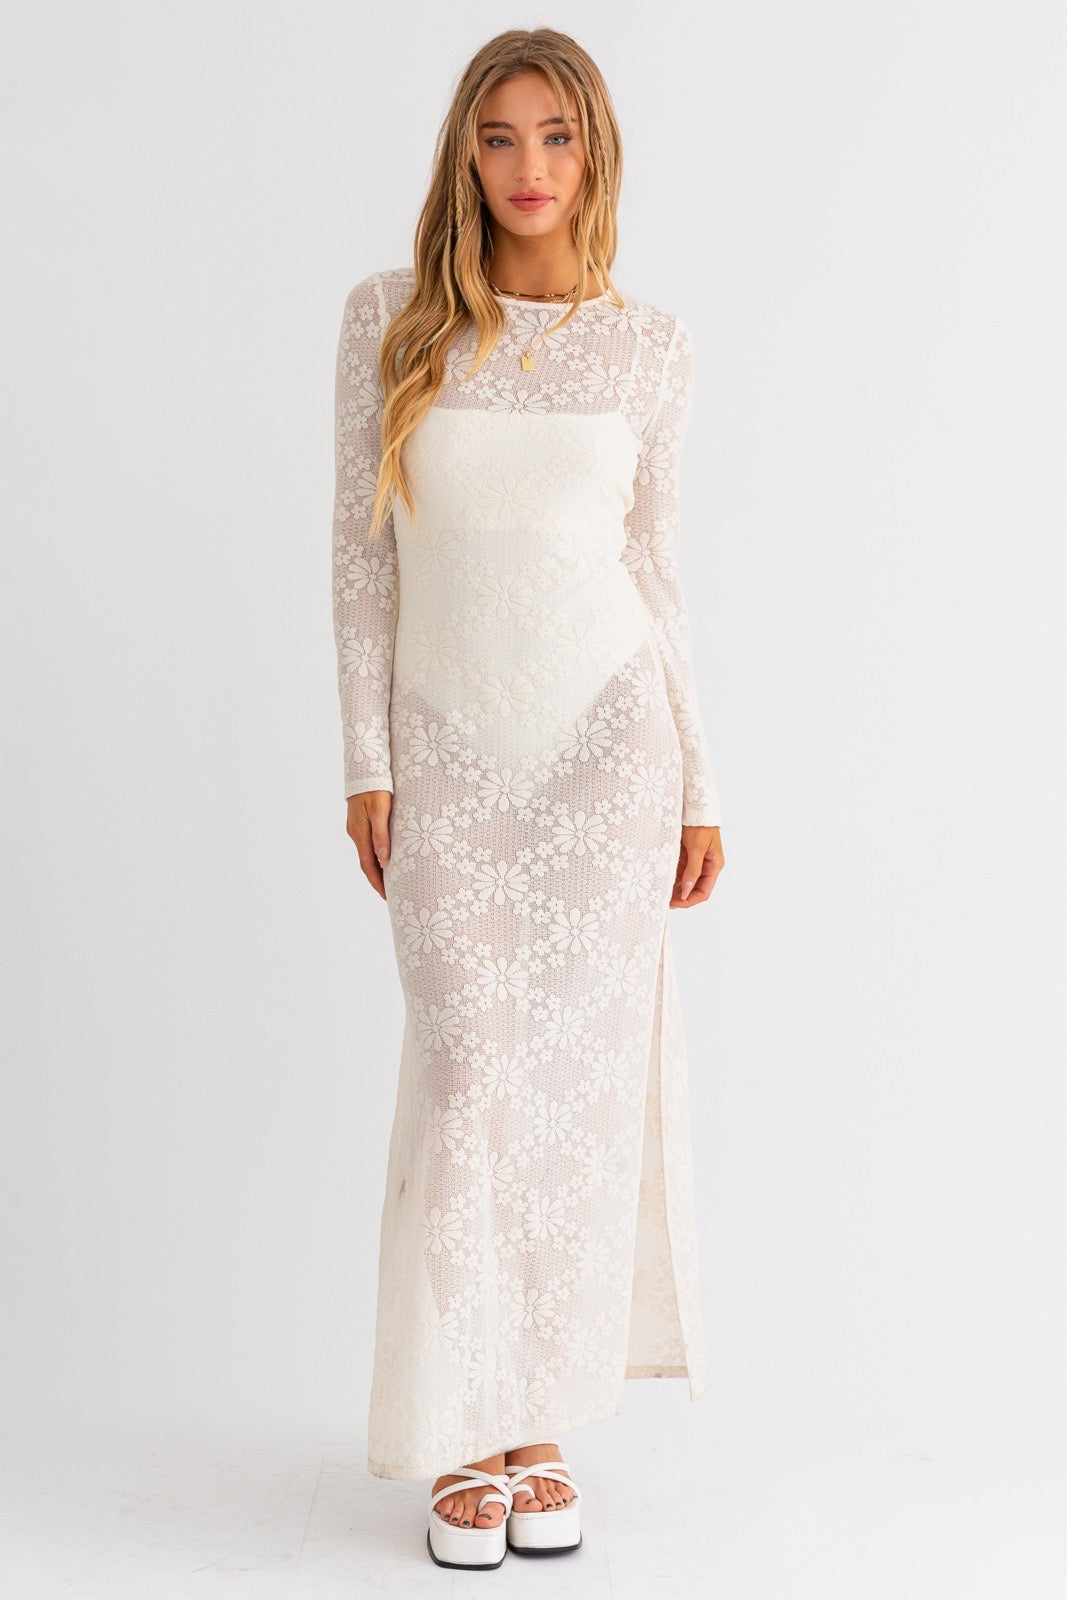 Mindy Flower Patterned Lace Cover-Up Maxi Dress